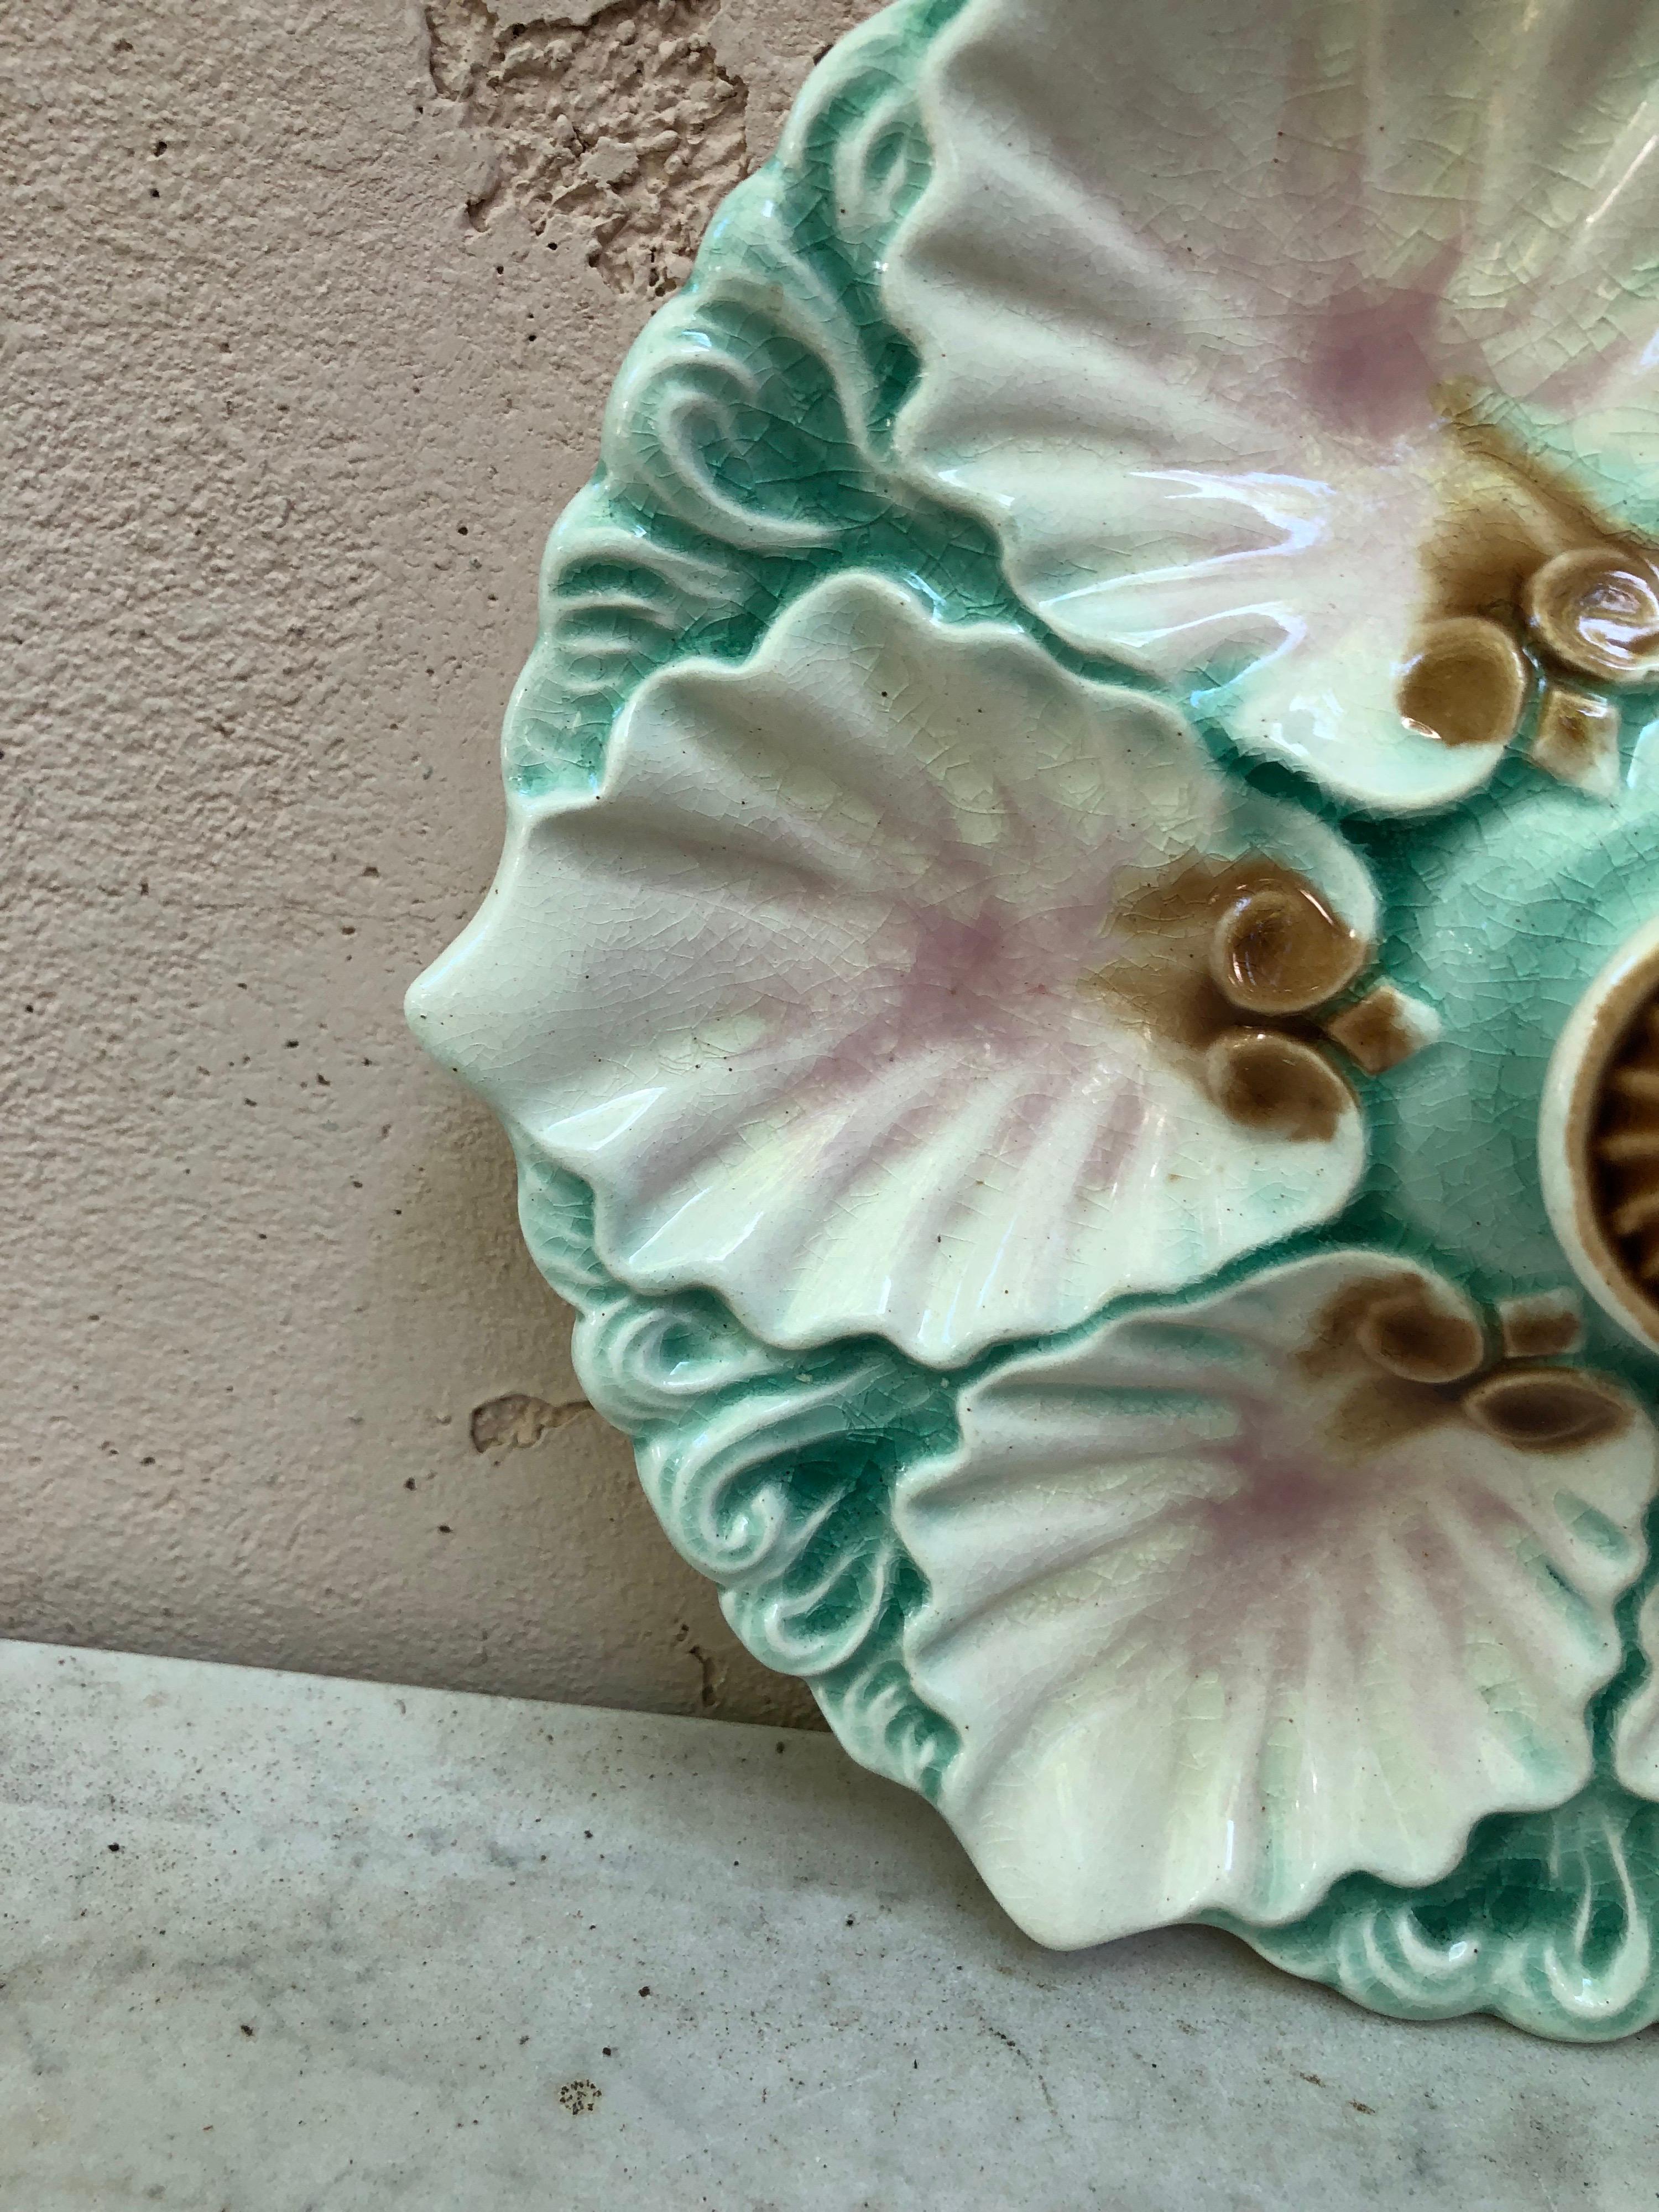 Majolica handled oyster plate with handle on the center from Orchies, circa 1890.